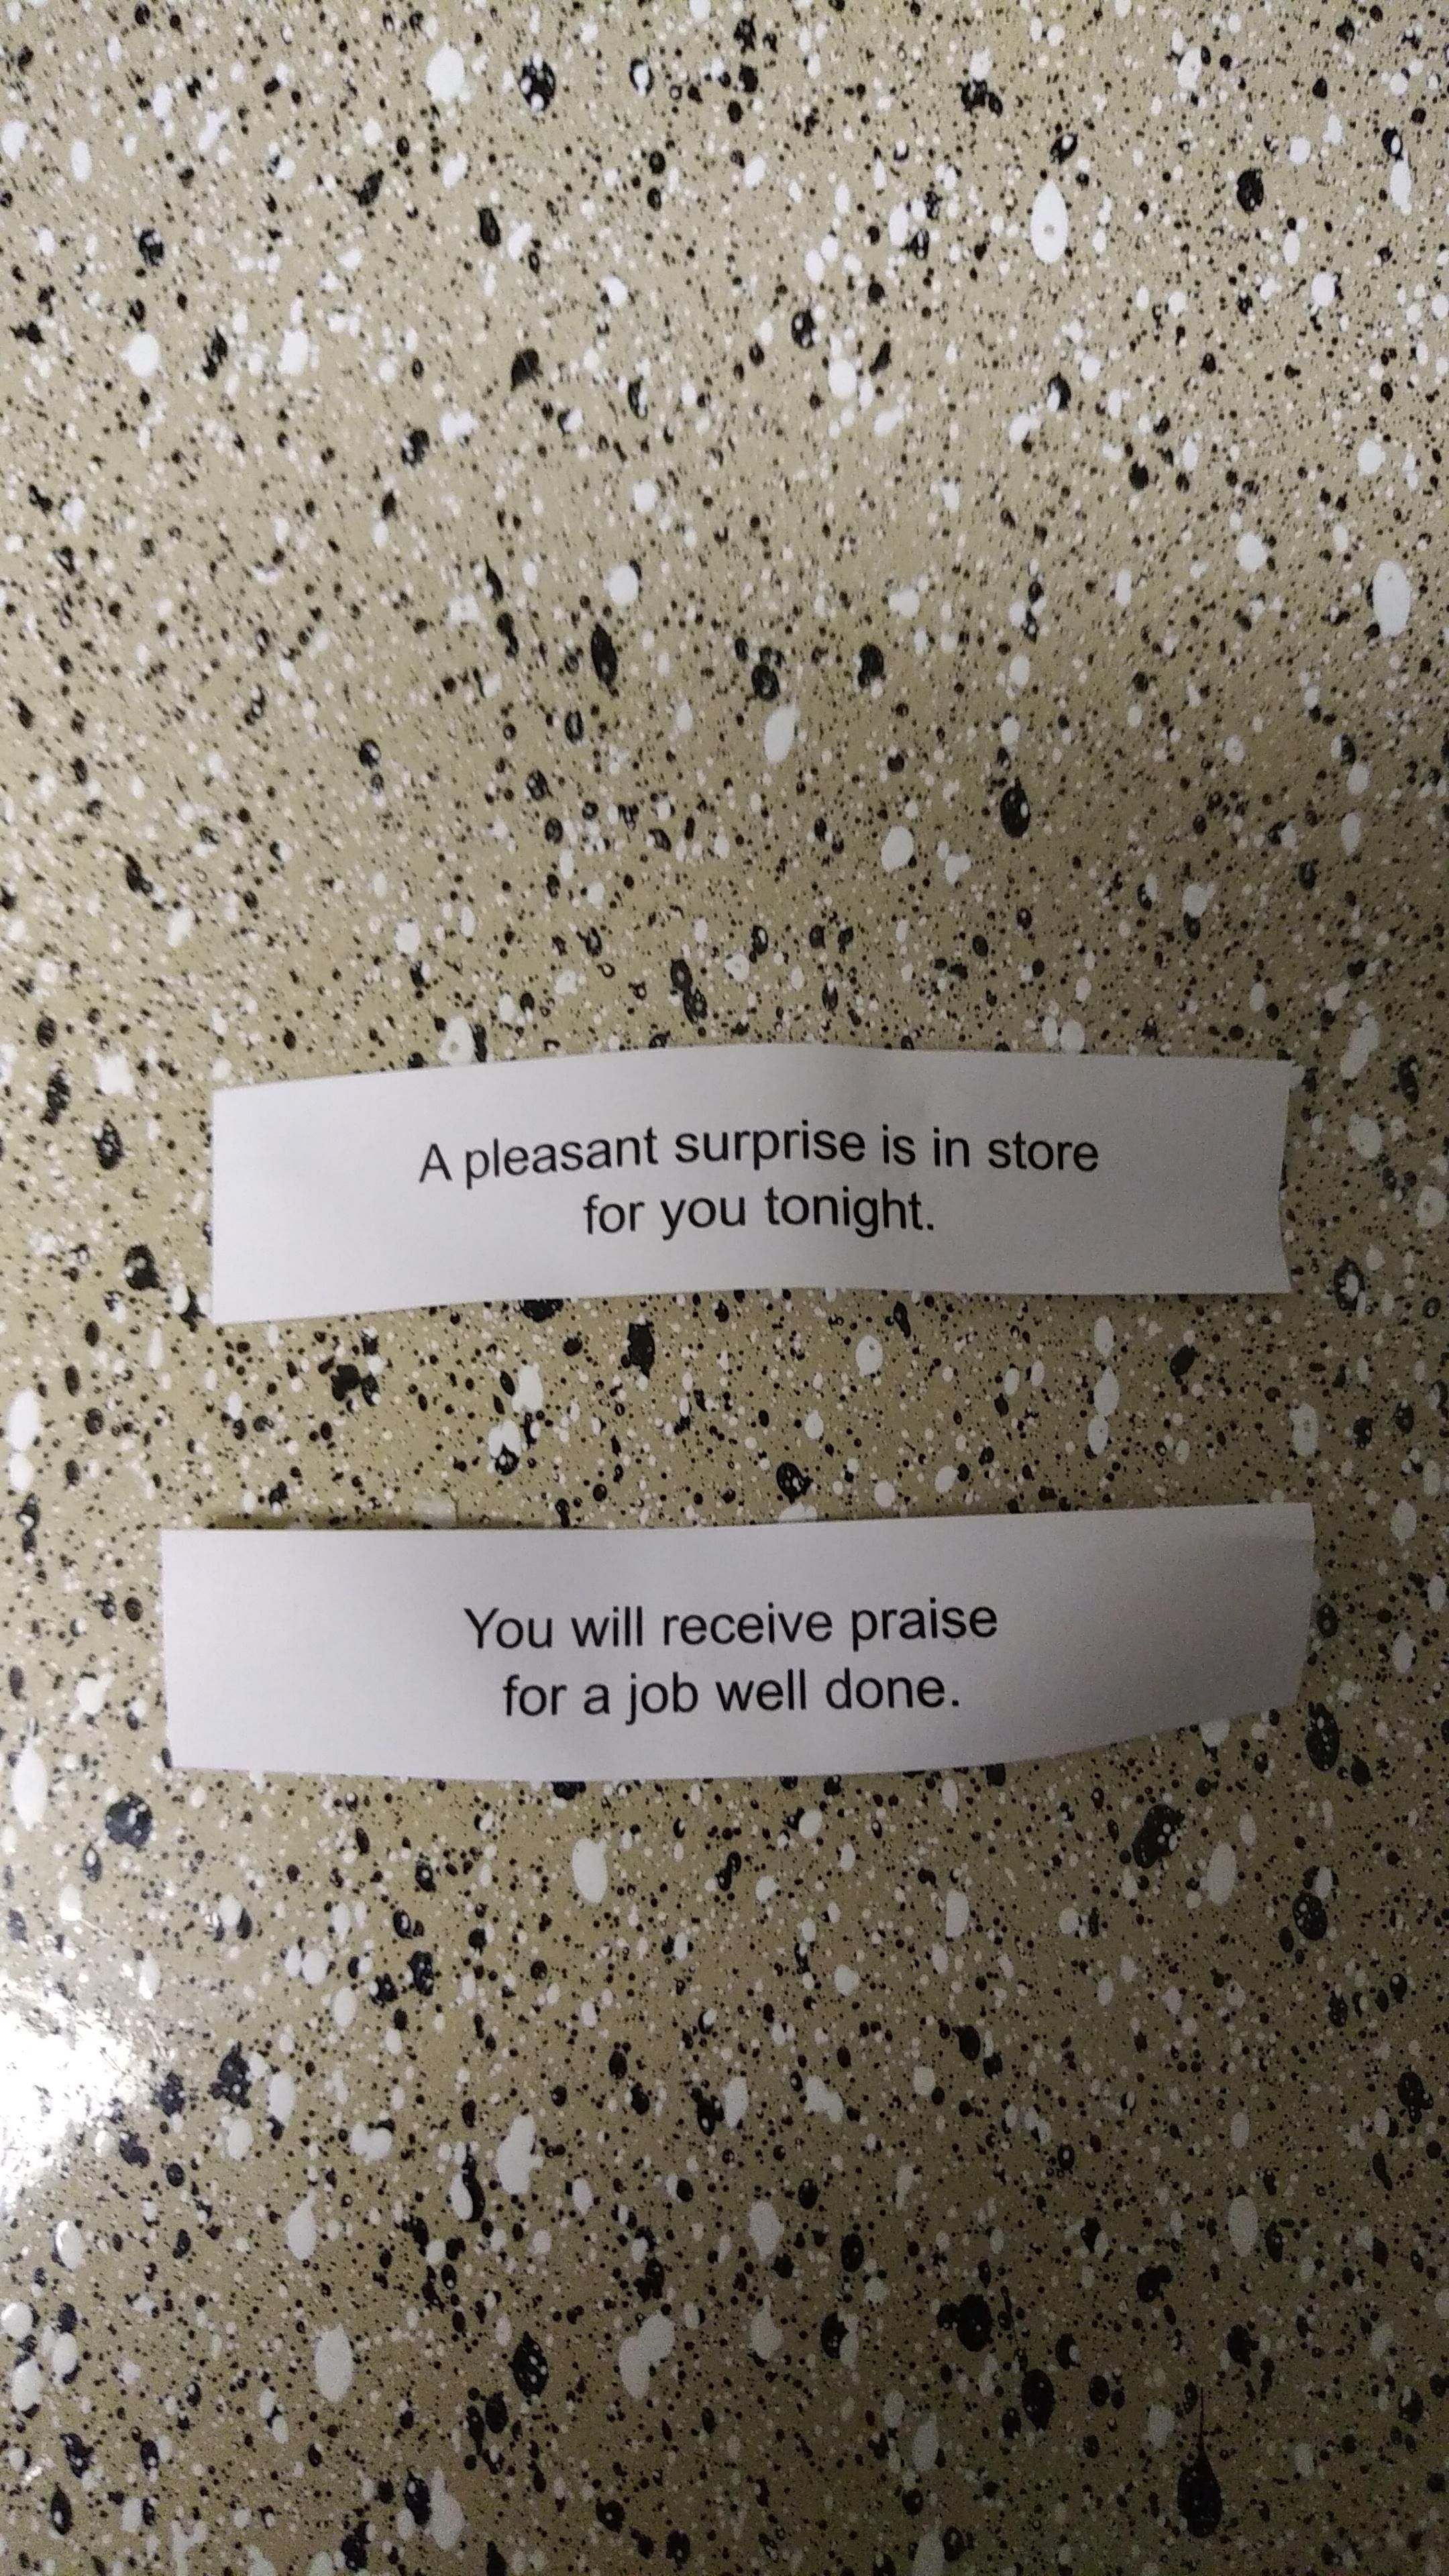 Me and the wife's fortune cookie messages